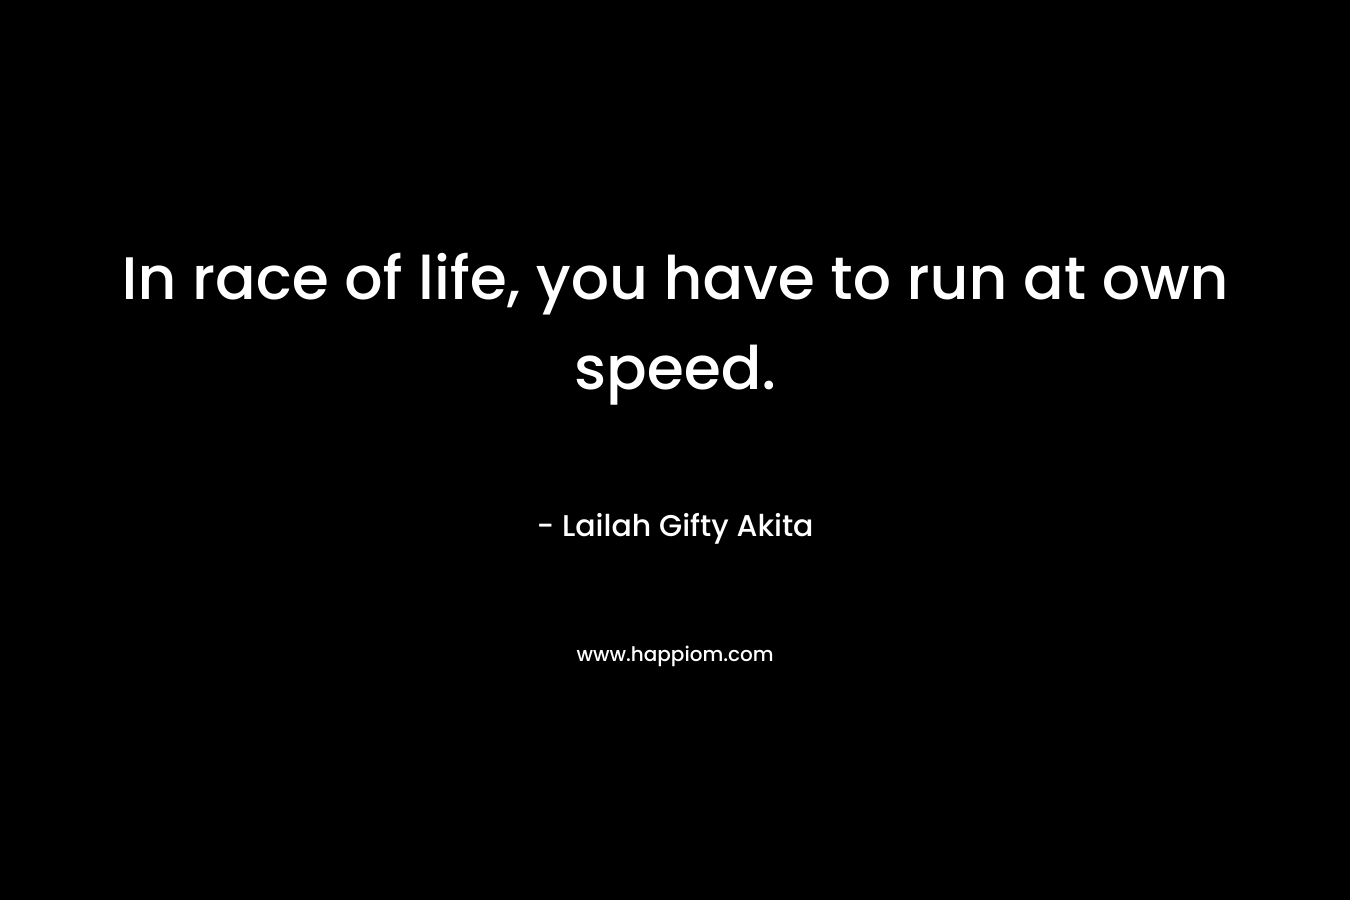 In race of life, you have to run at own speed.